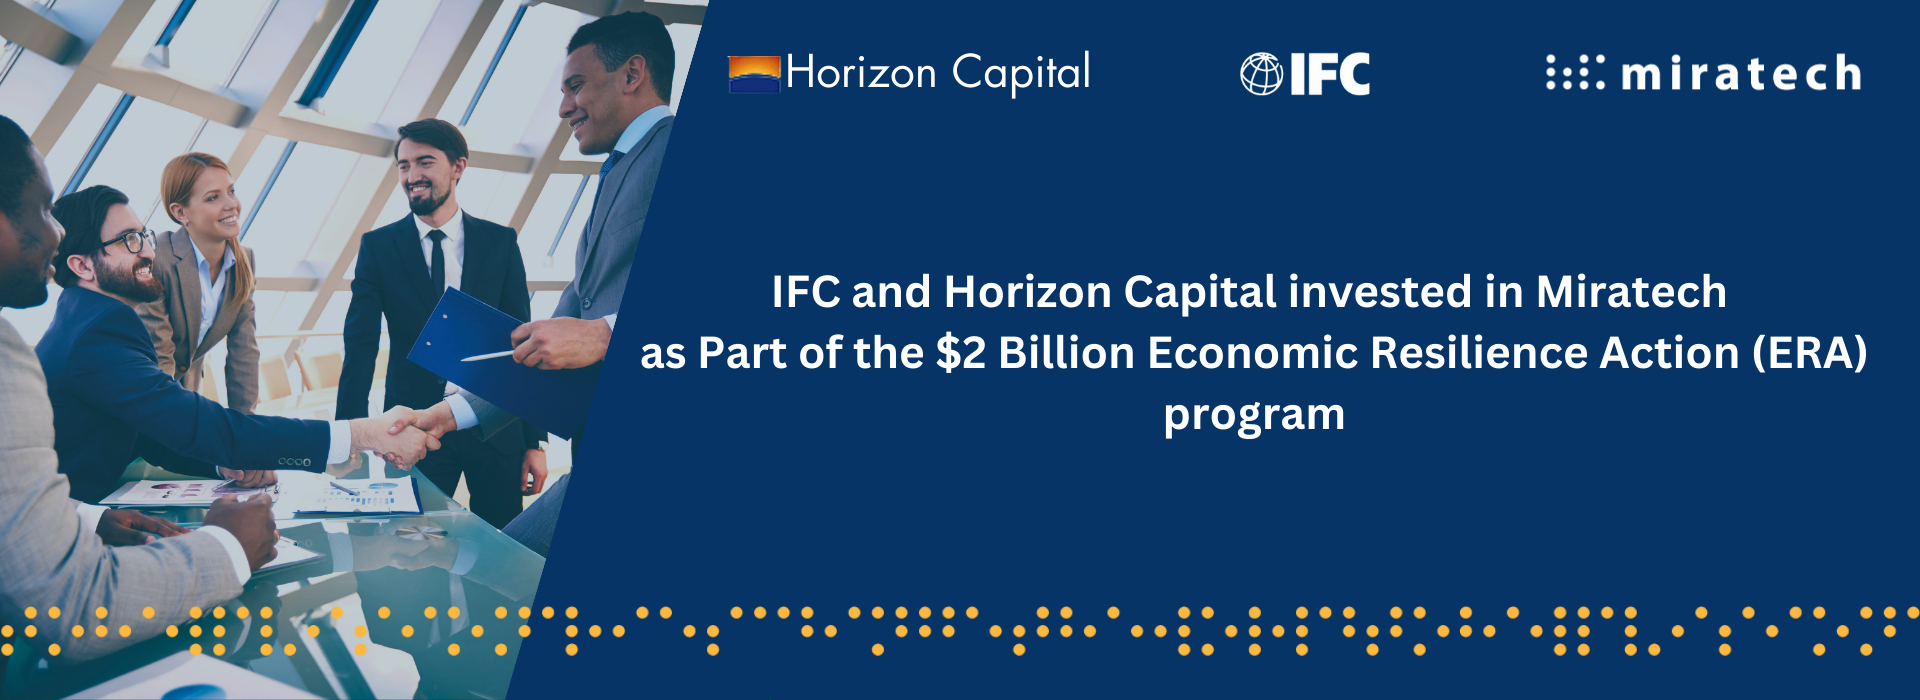 IFC and Horizon Capital Invest in Miratech to Strengthen Ukraine’s IT Sector and Promote Economic Resilience